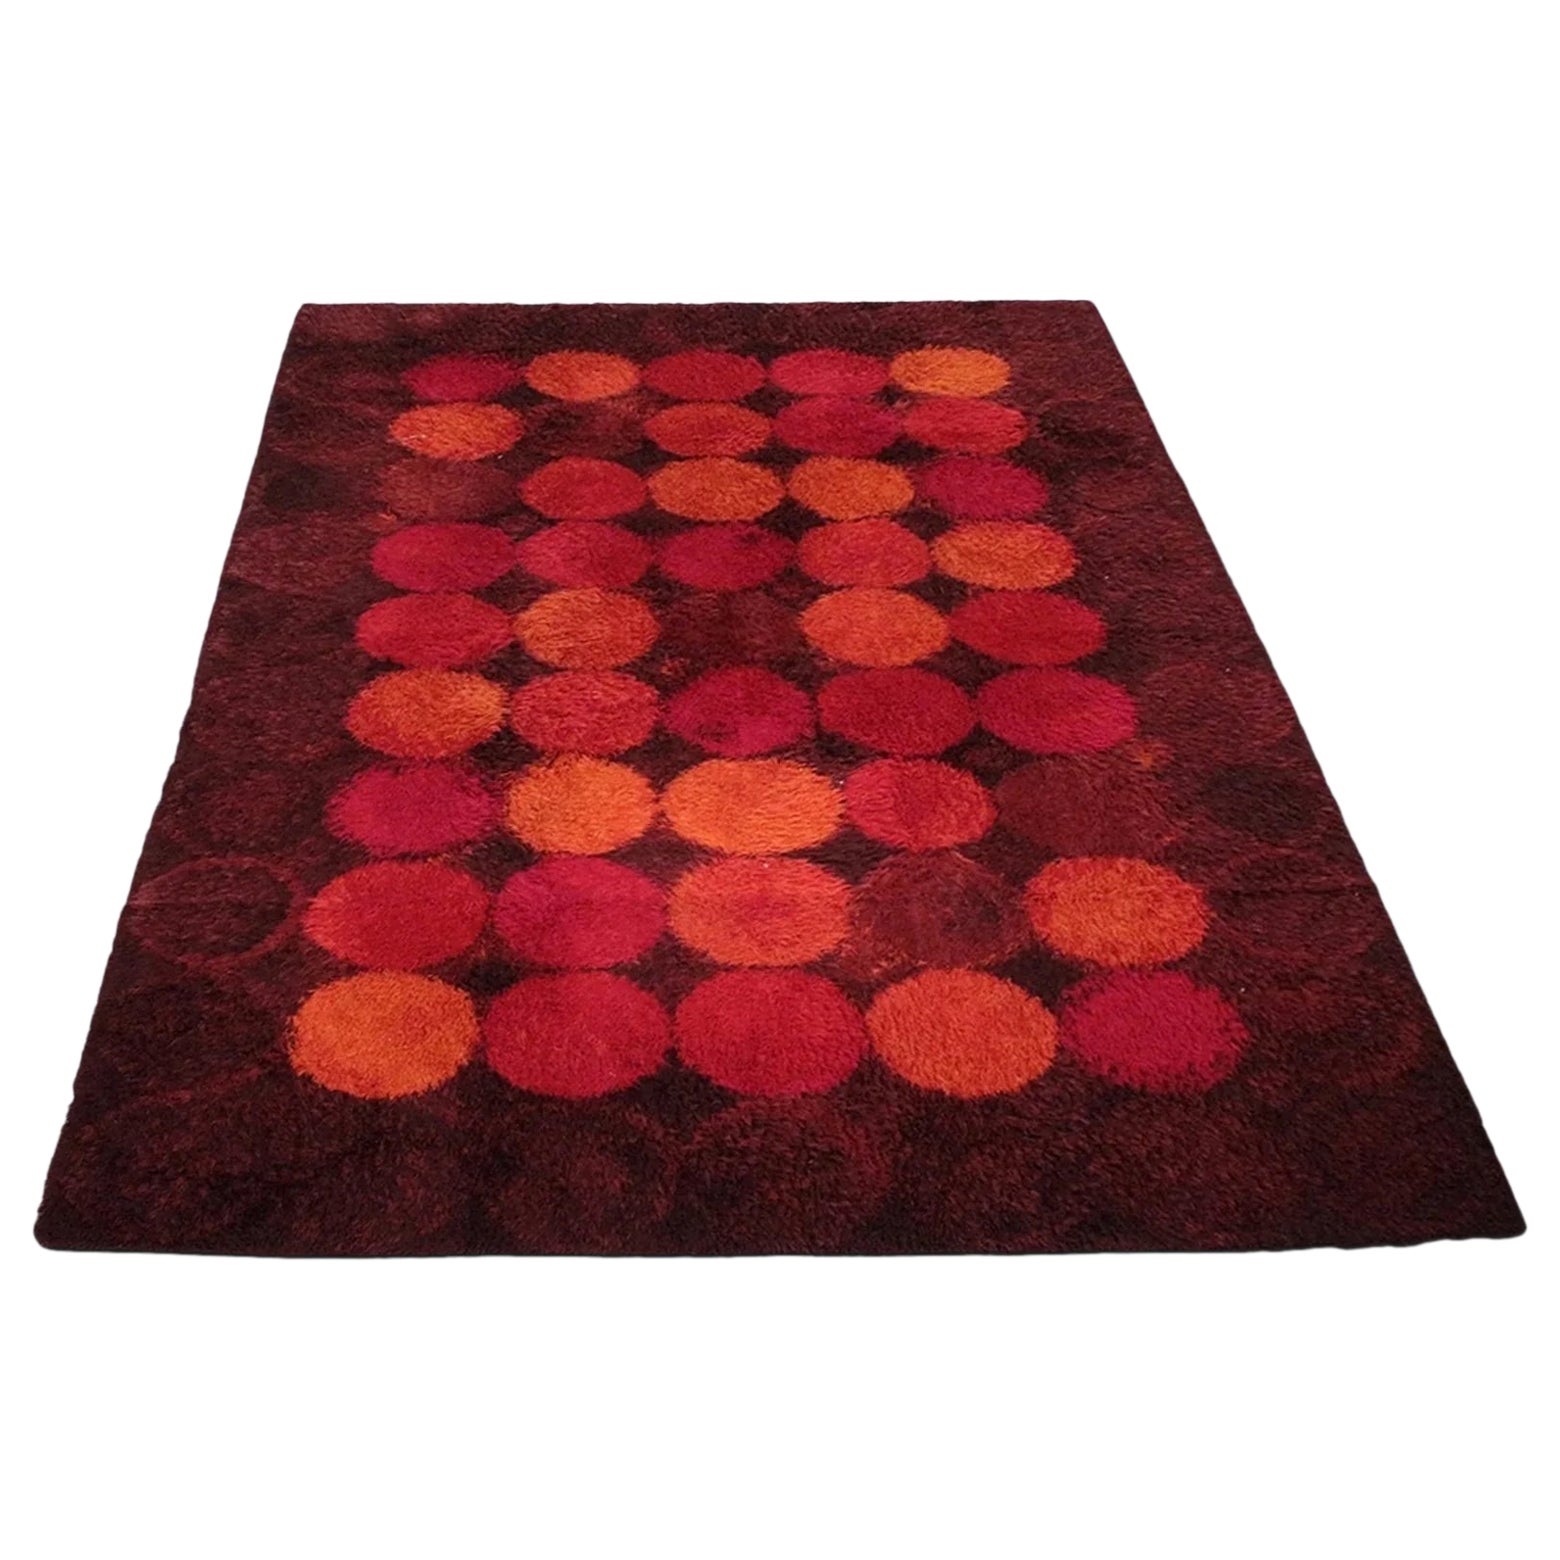 Large 1970s space age rya rug For Sale